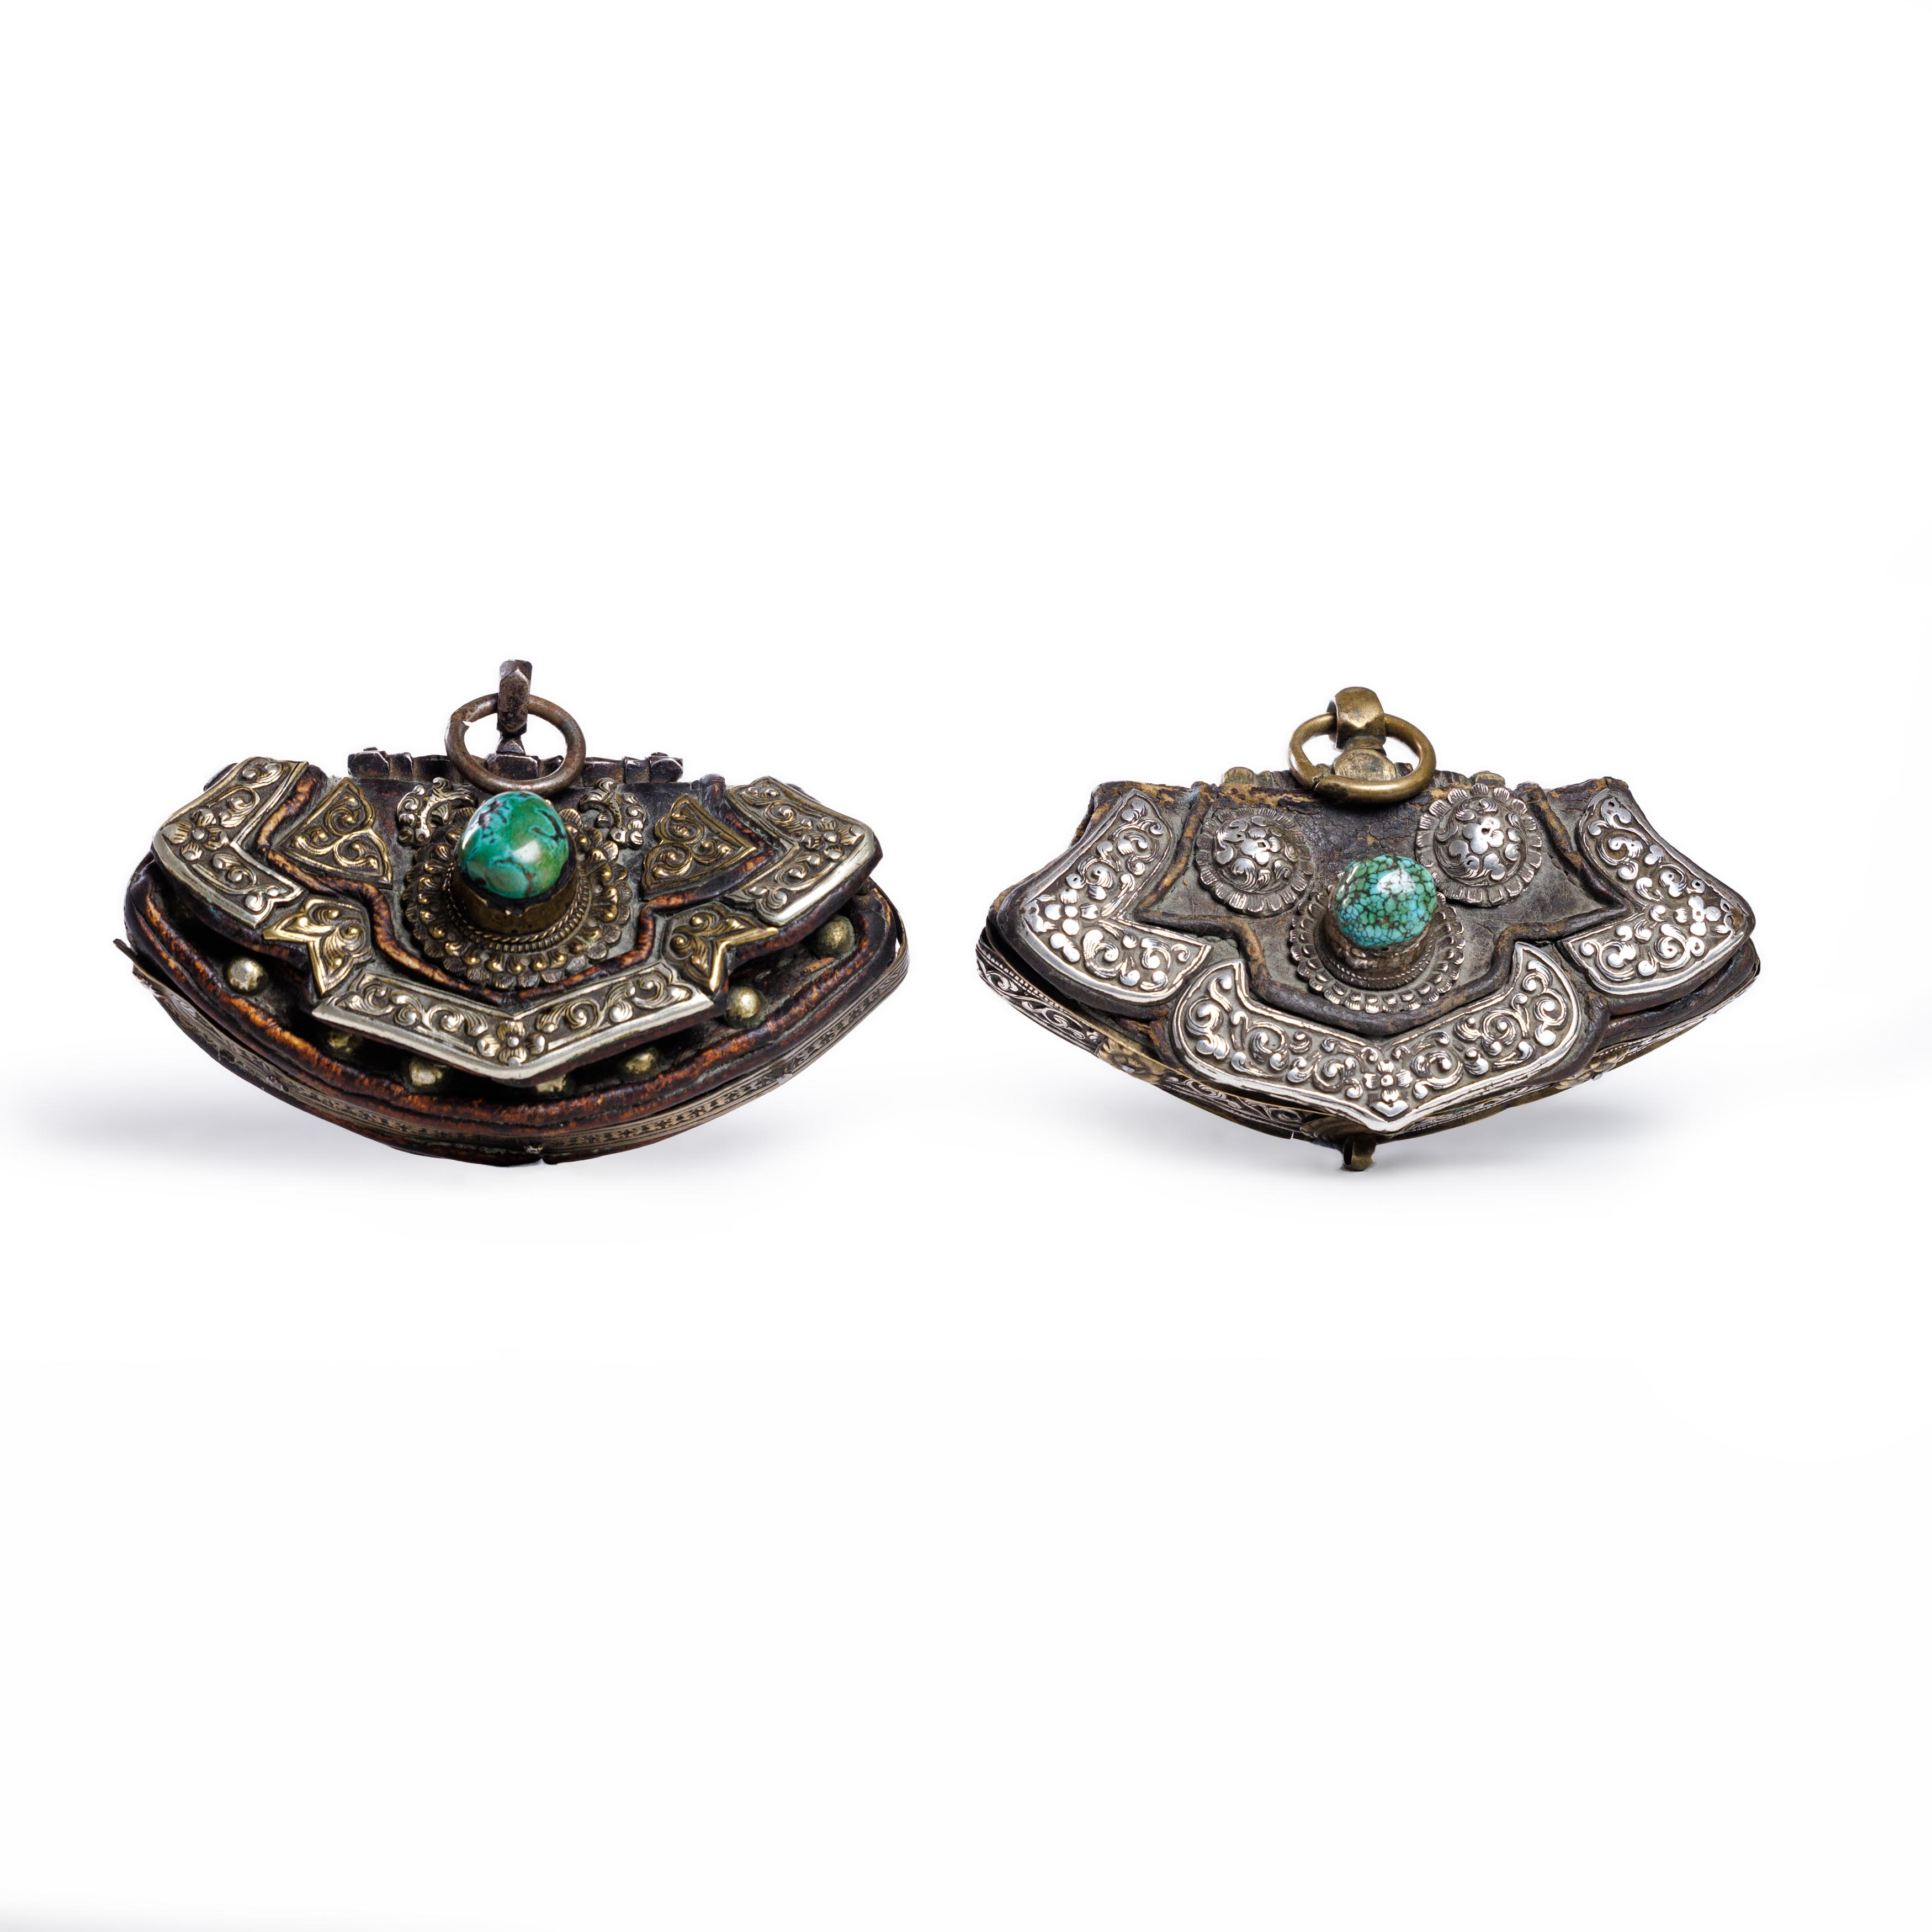 Two Tibetan silver mounted leather pouches 18th/19th Century Comprising a pouch mounted with tw...